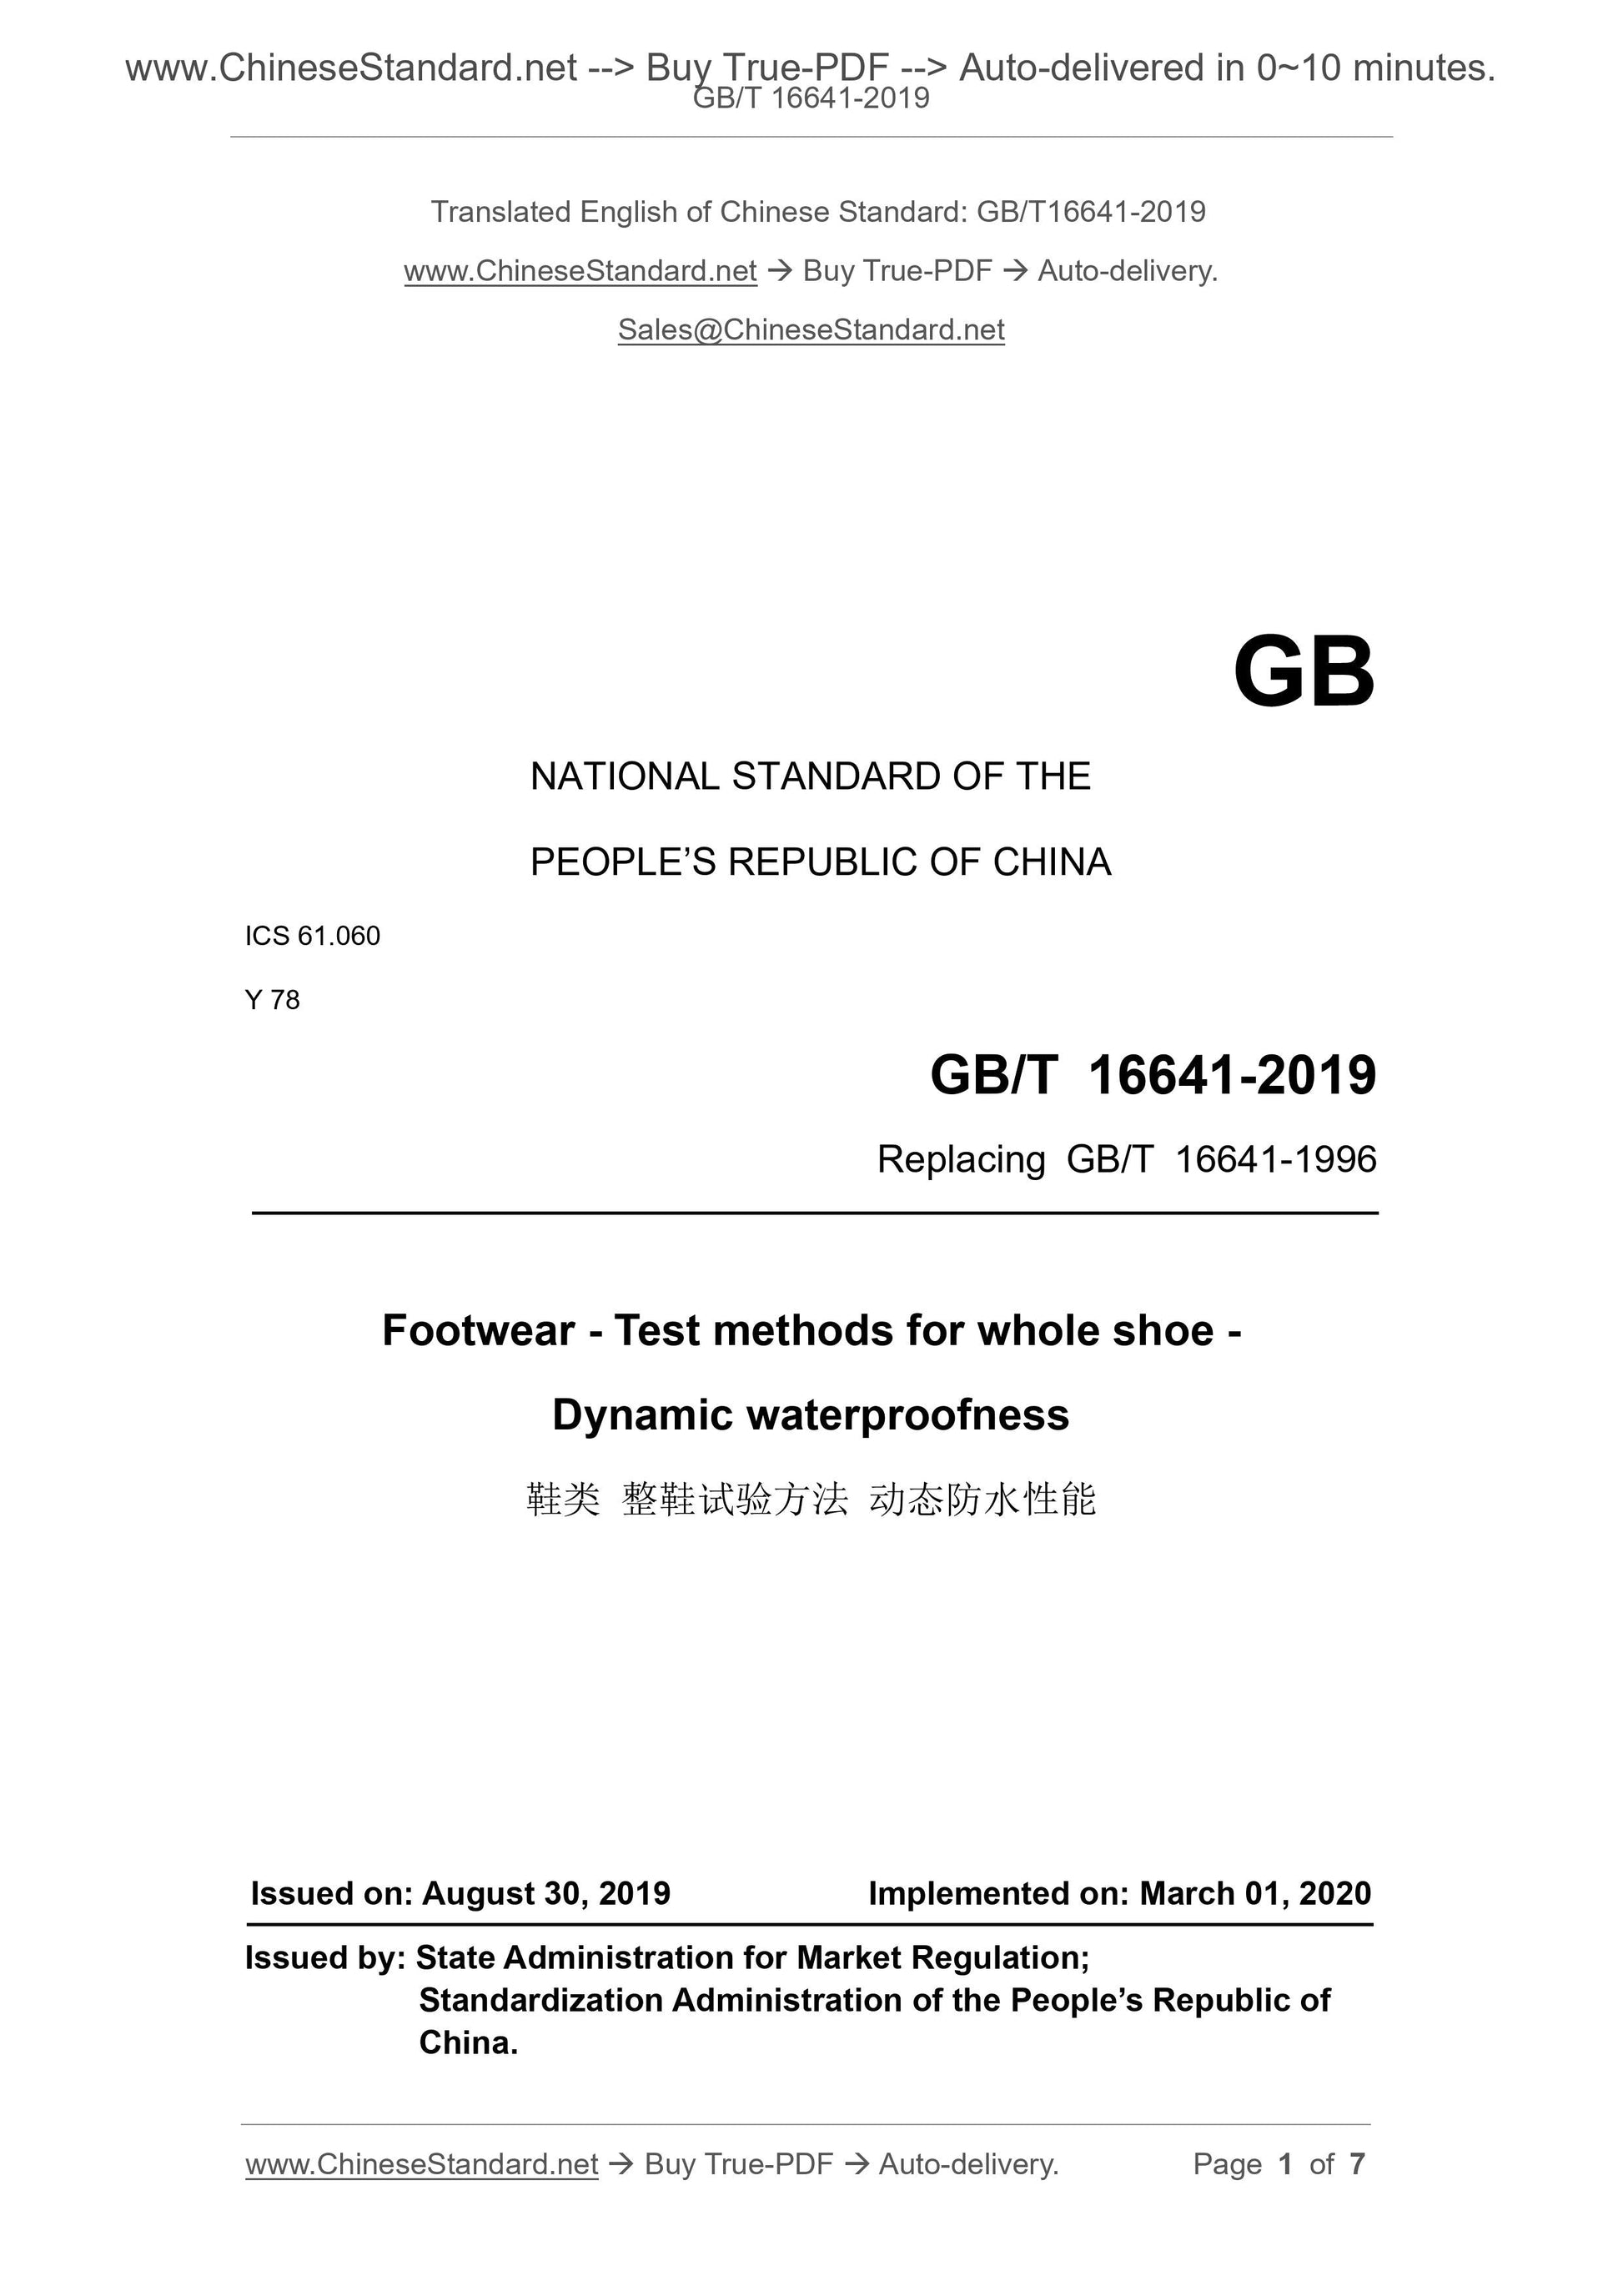 GB/T 16641-2019 Page 1